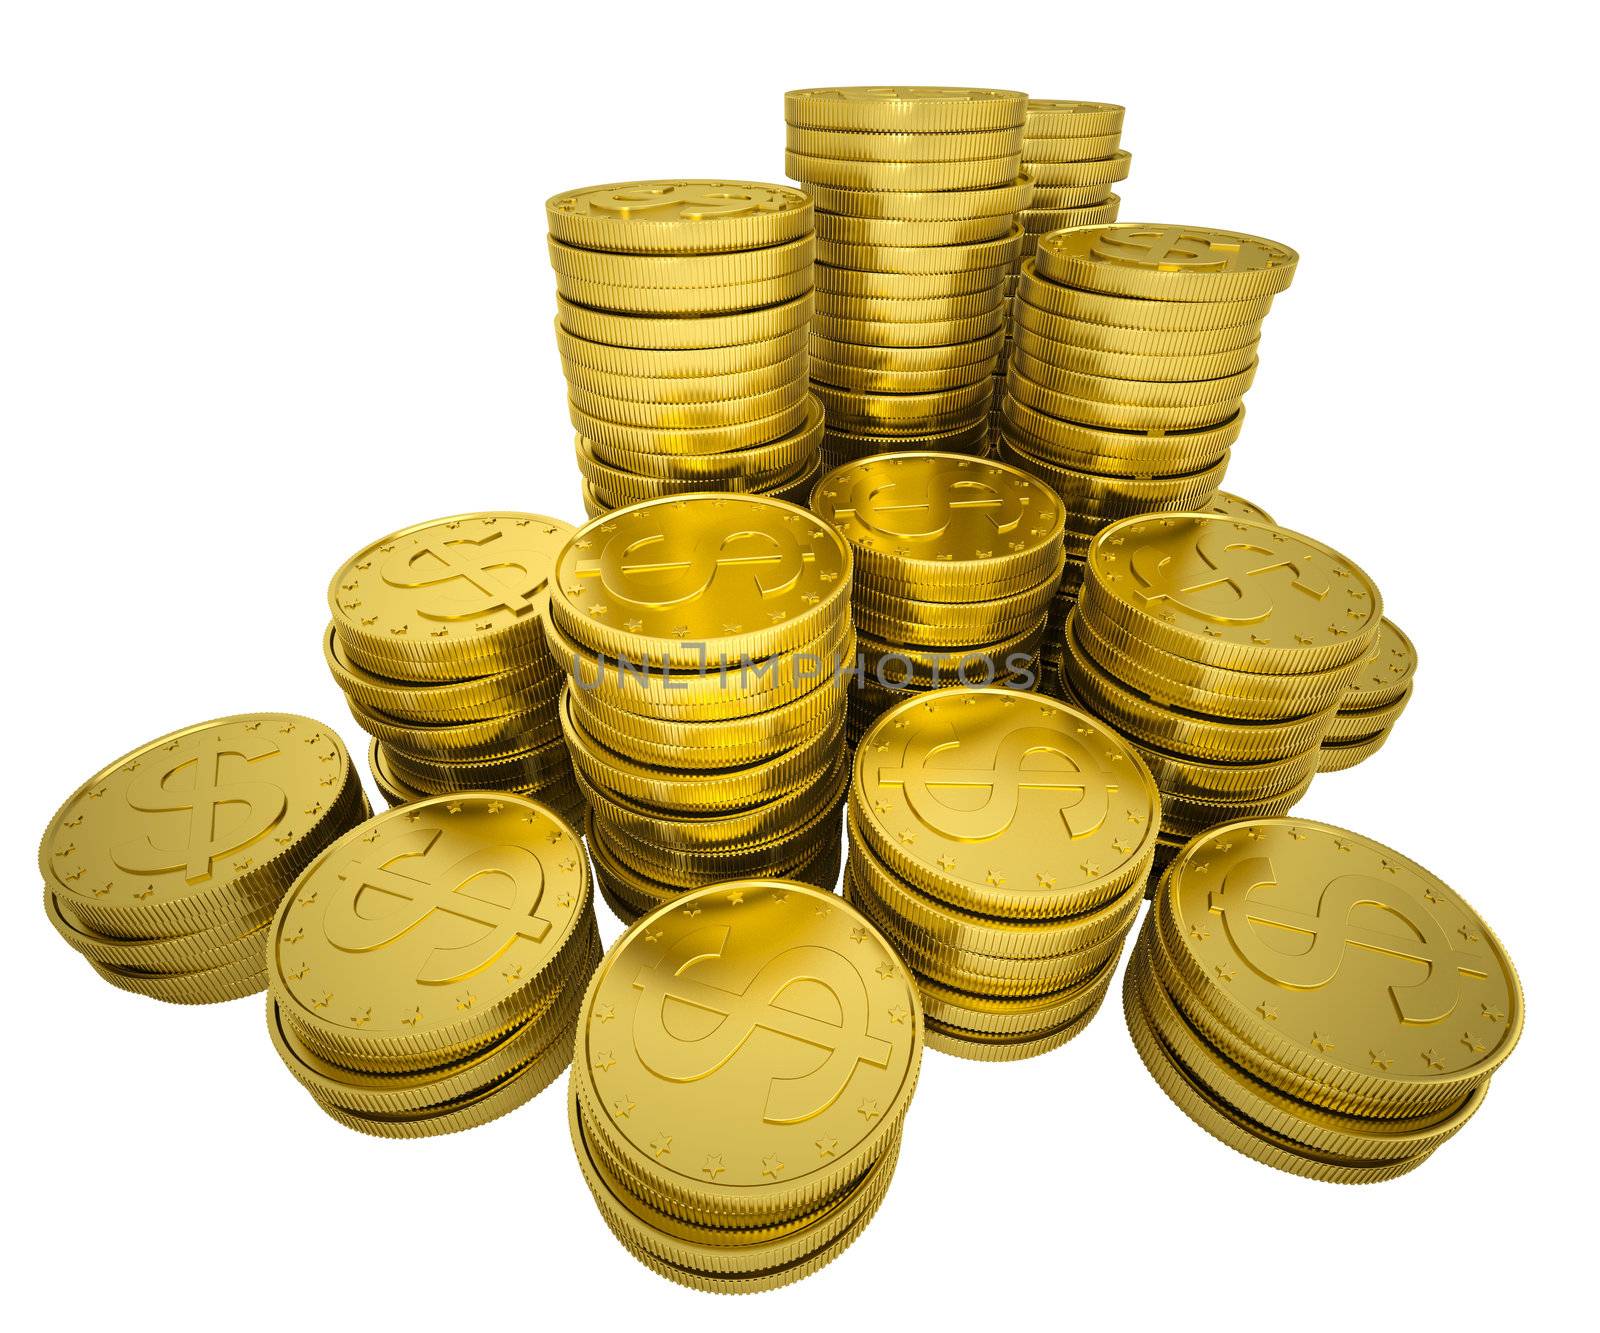 Pile gold coins. Isolated render on a white background